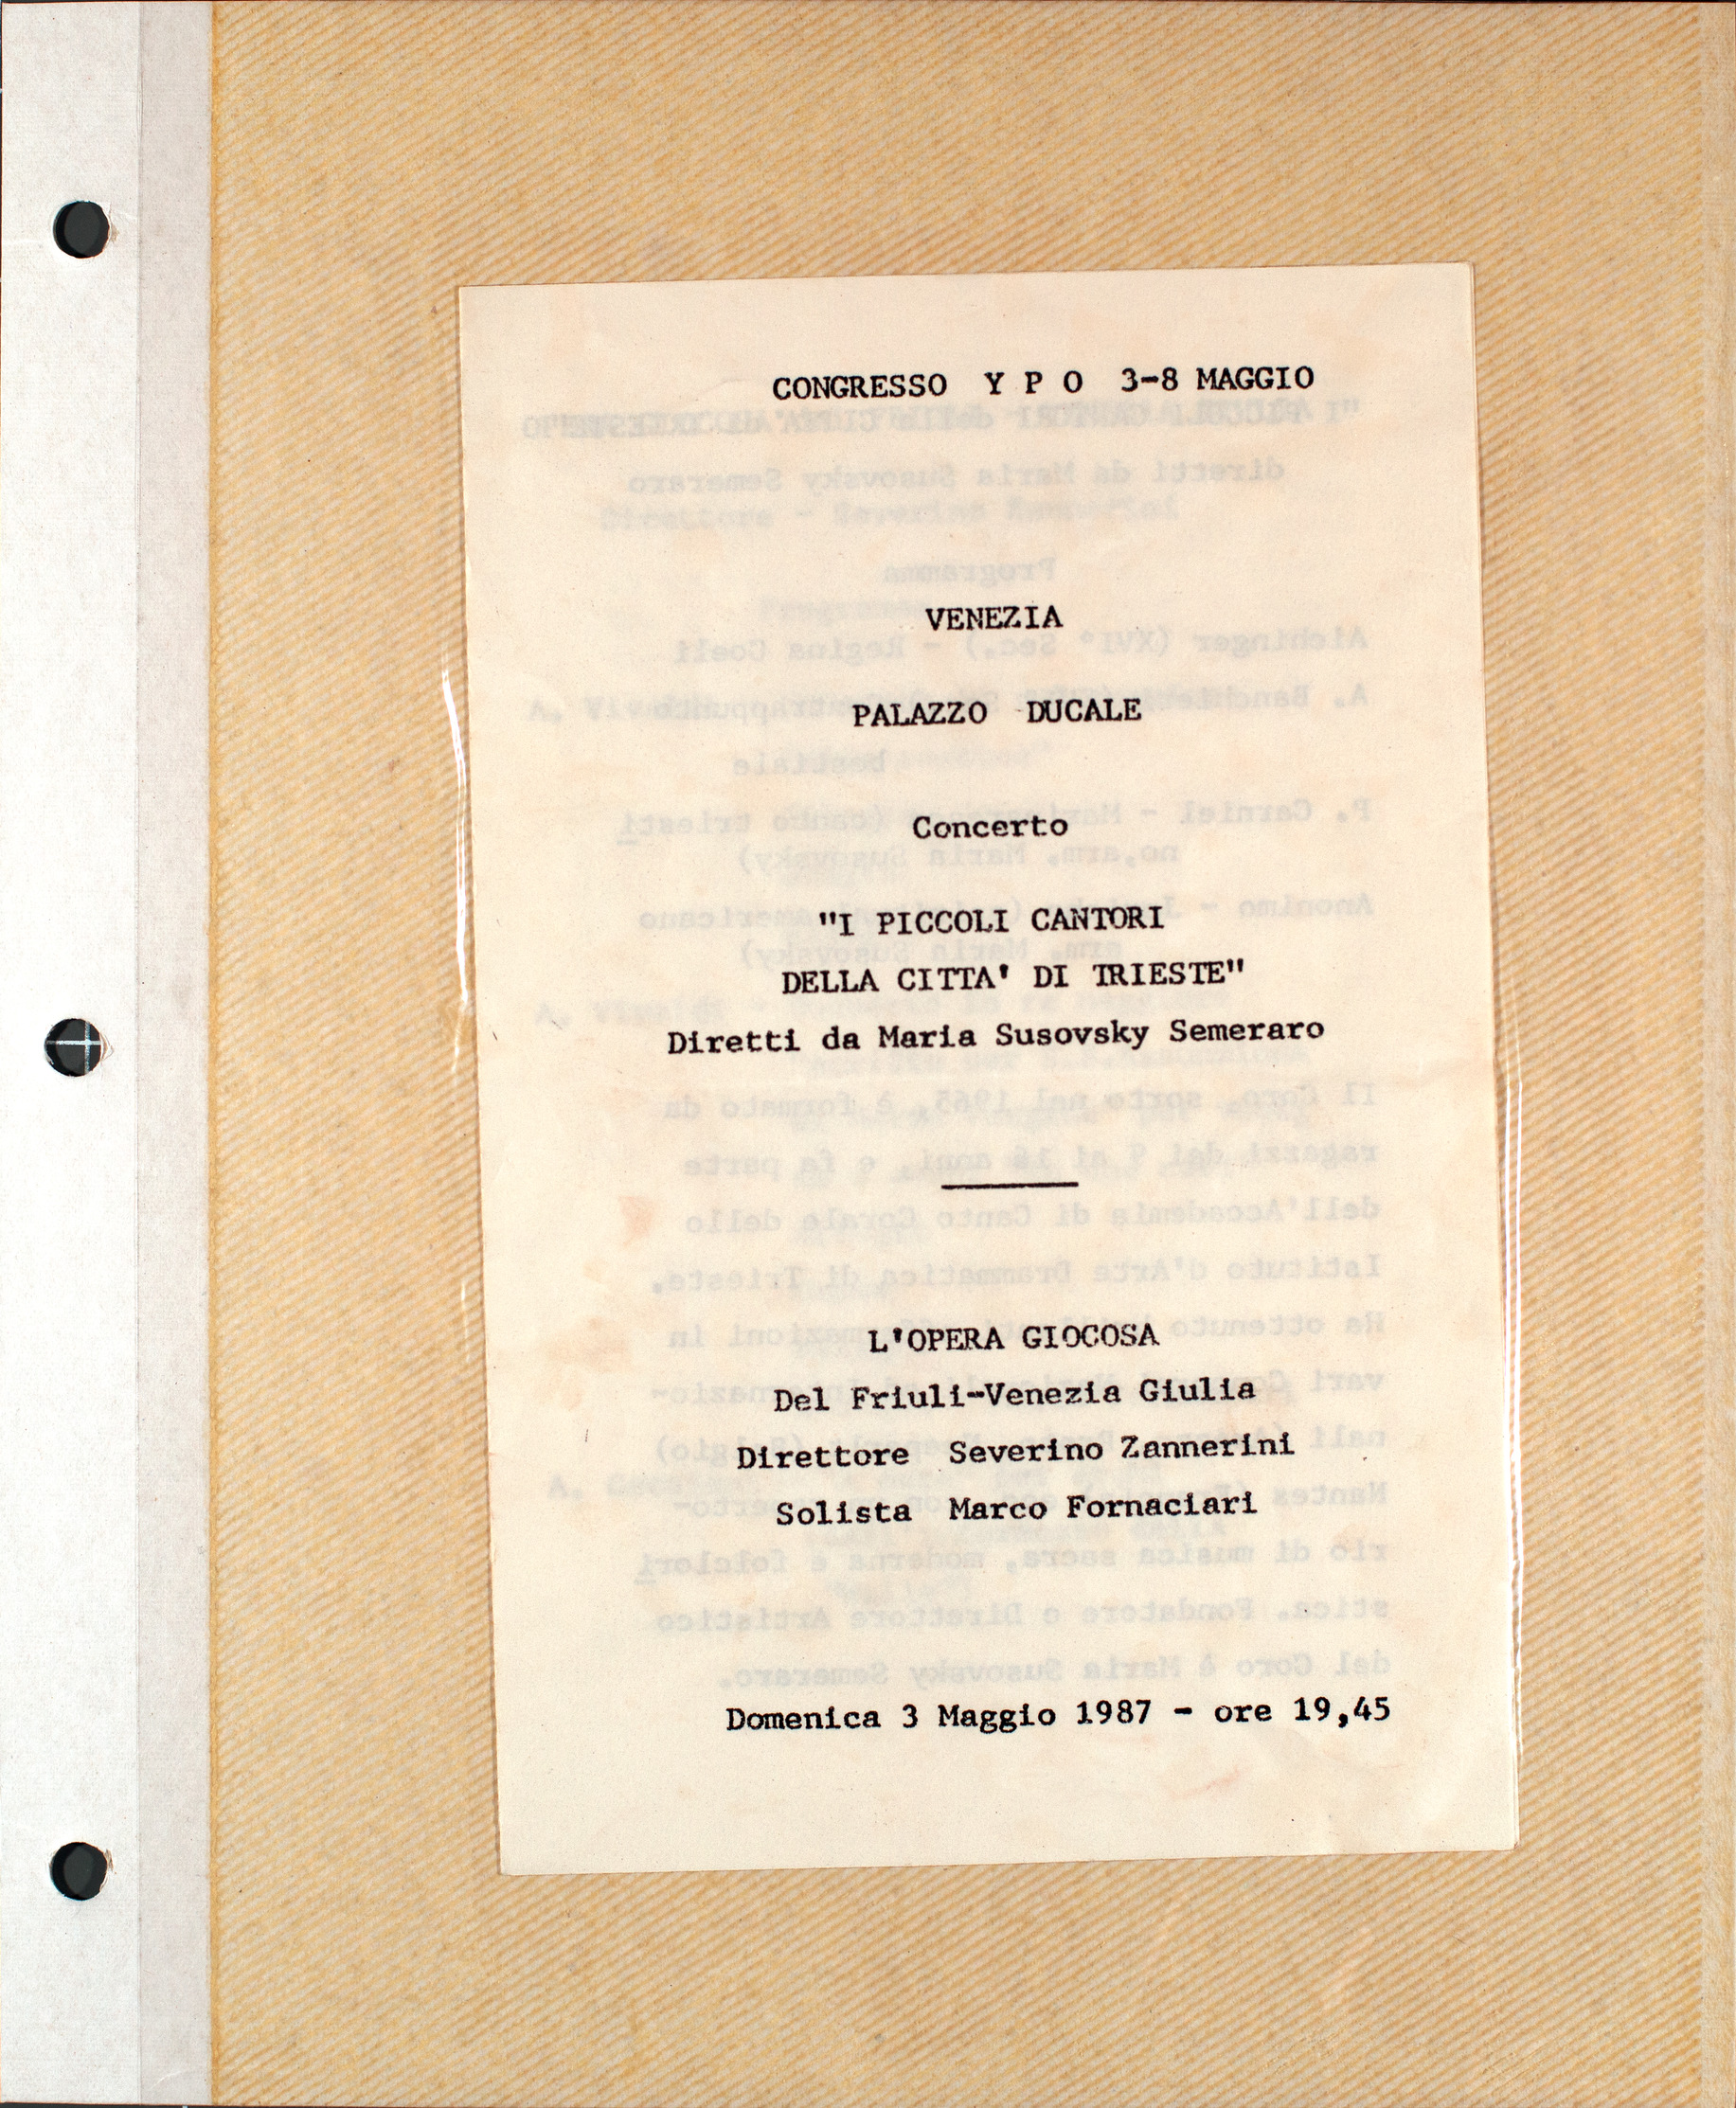 Program for a concert, May 3, 1987